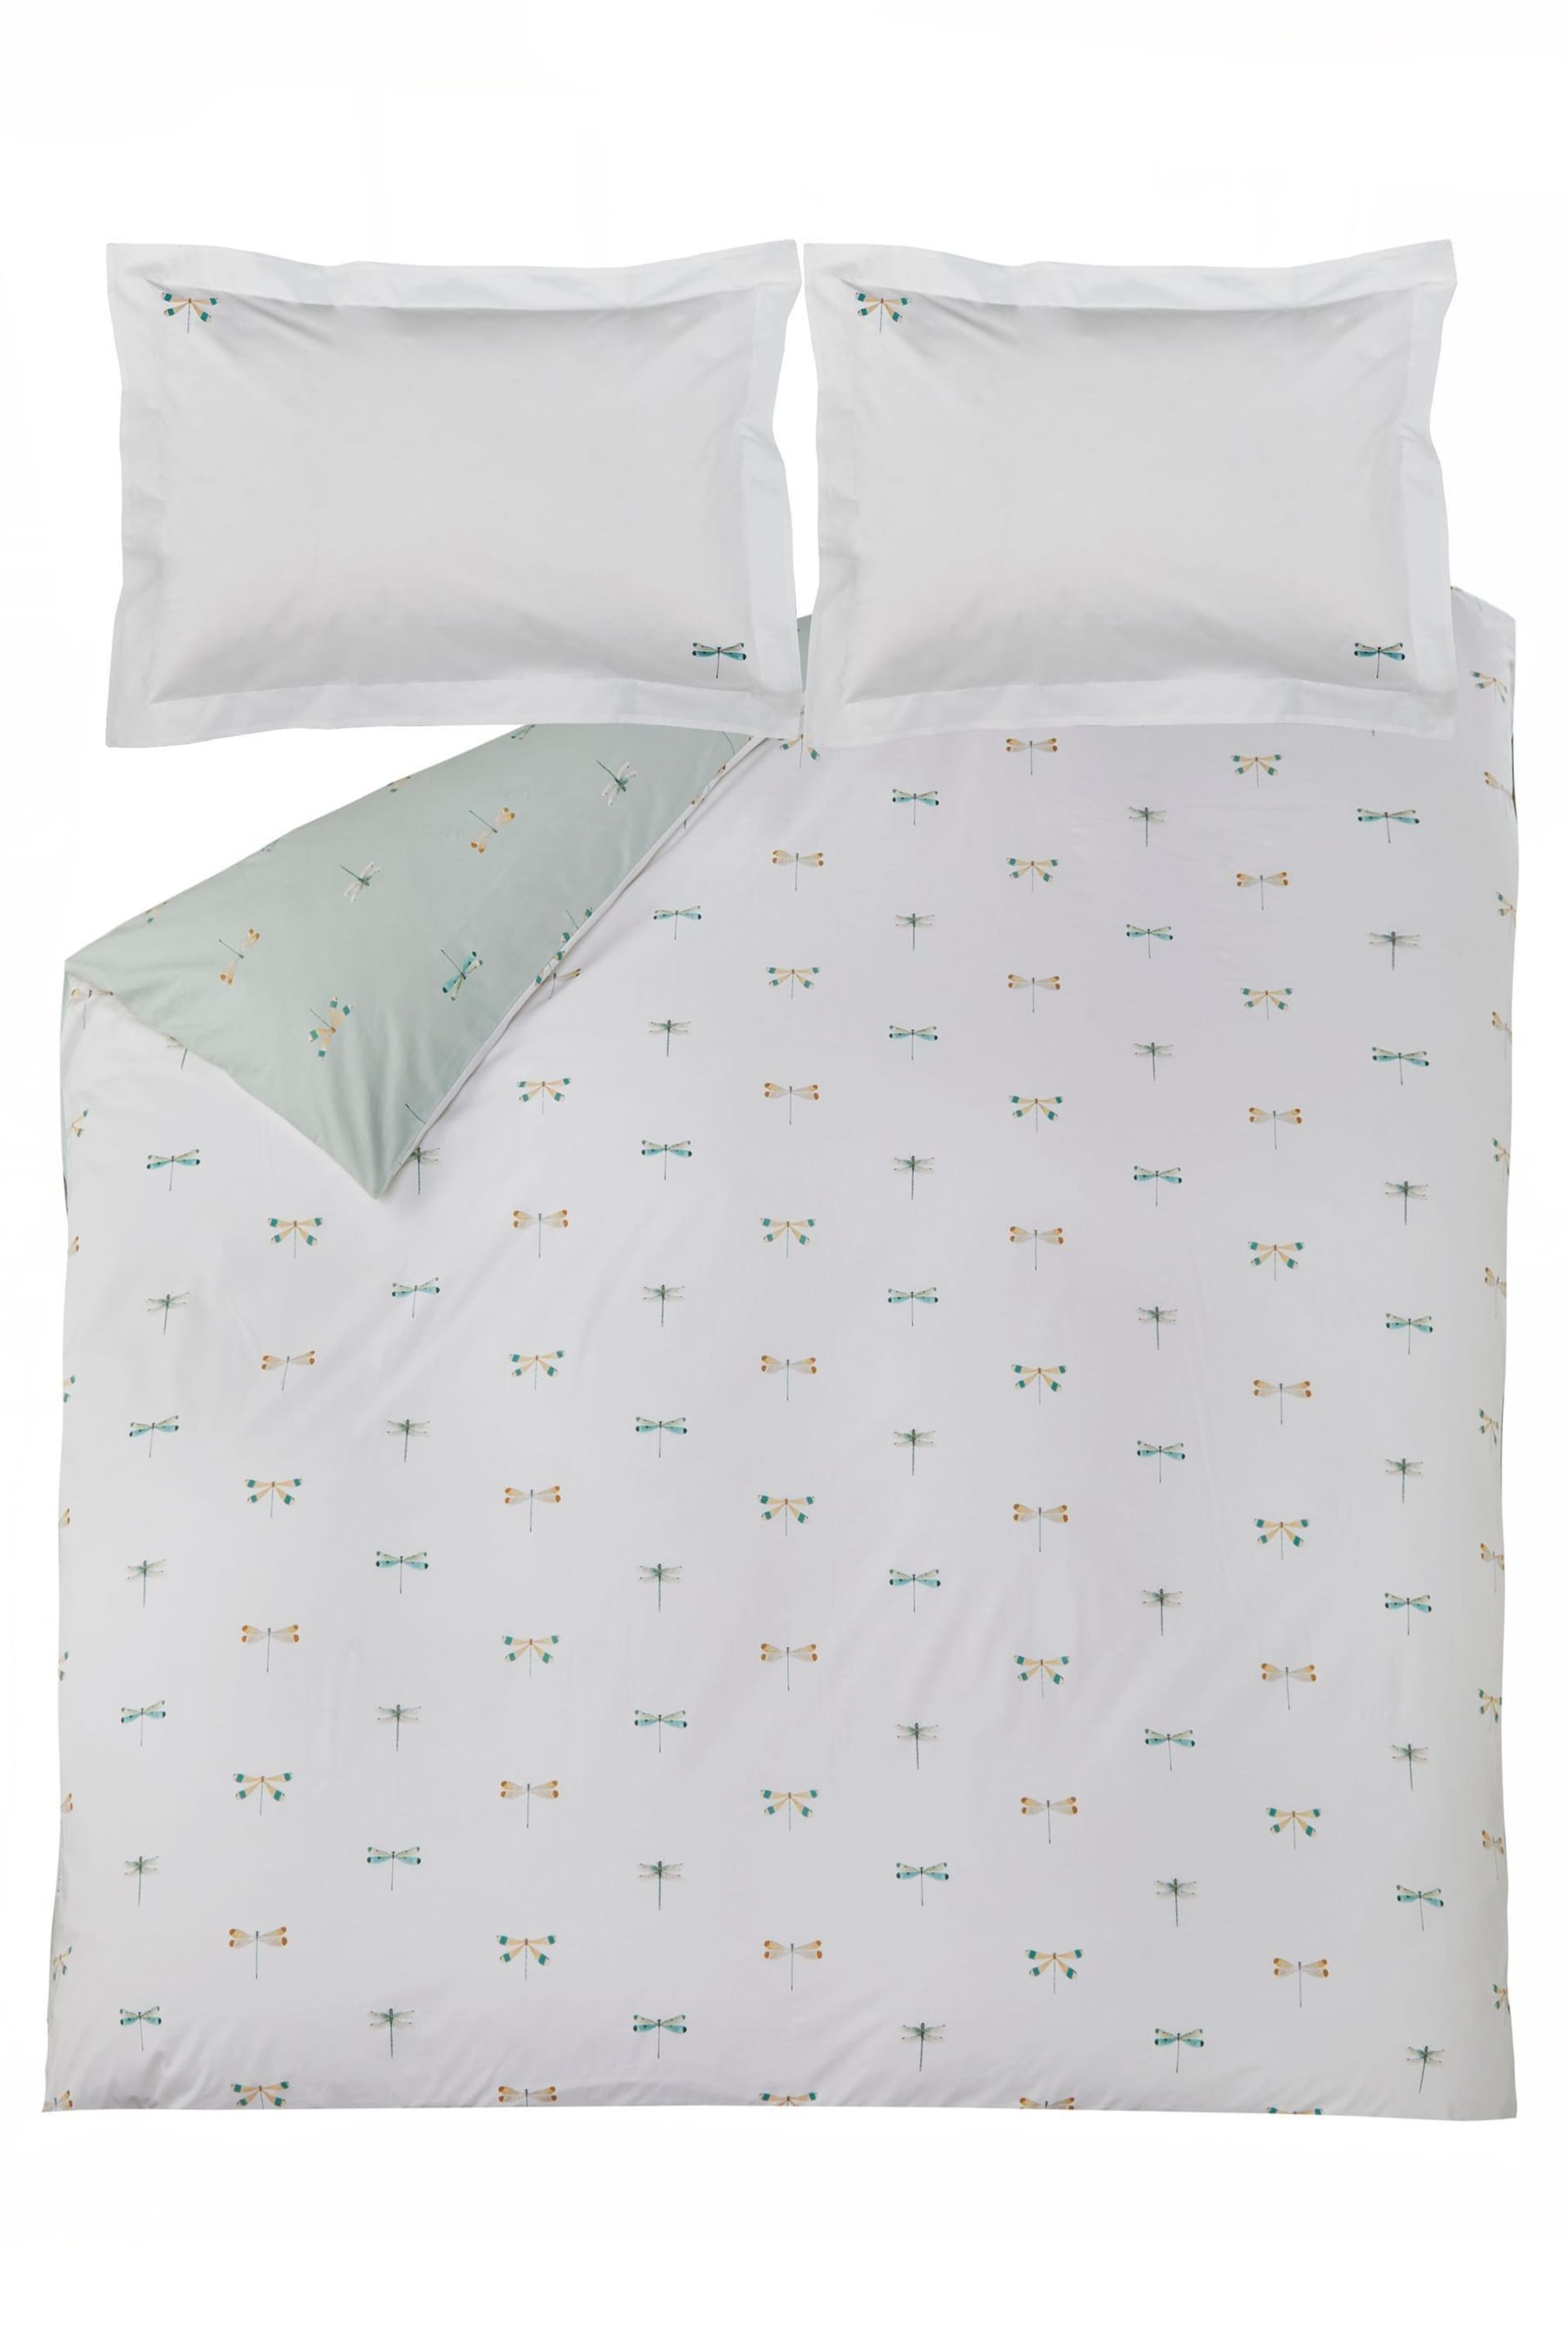 Sophie Allport Pale Duckegg Dragonfly Duvet Cover And Pillowcase Set - Image 3 of 5